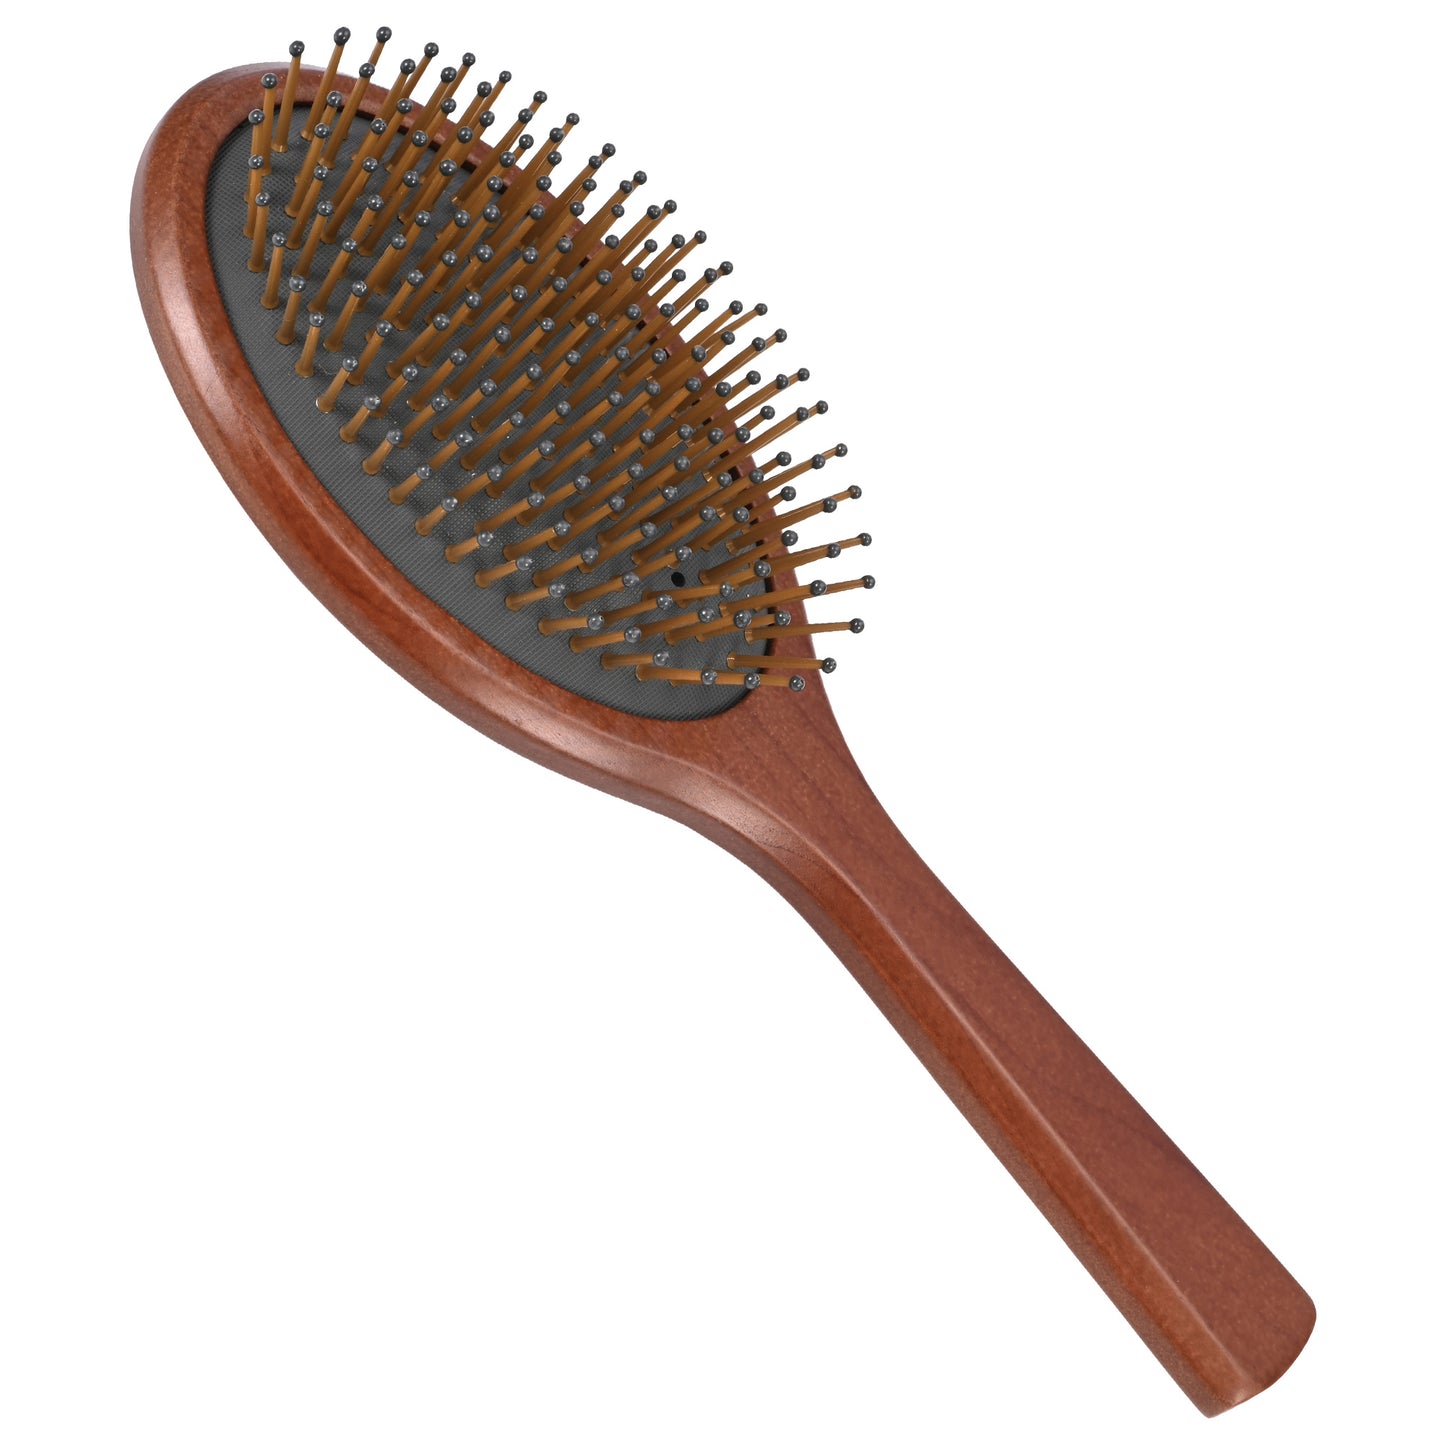 JIYUERLTD Cherry Wood Air Cushion Comb - Large Wooden Hair Brush with High Elastic Air Bag and Scalp Massage - Smooths Curly and Straight Hair - Ideal for Men, Women, and Children (Oval Shape)